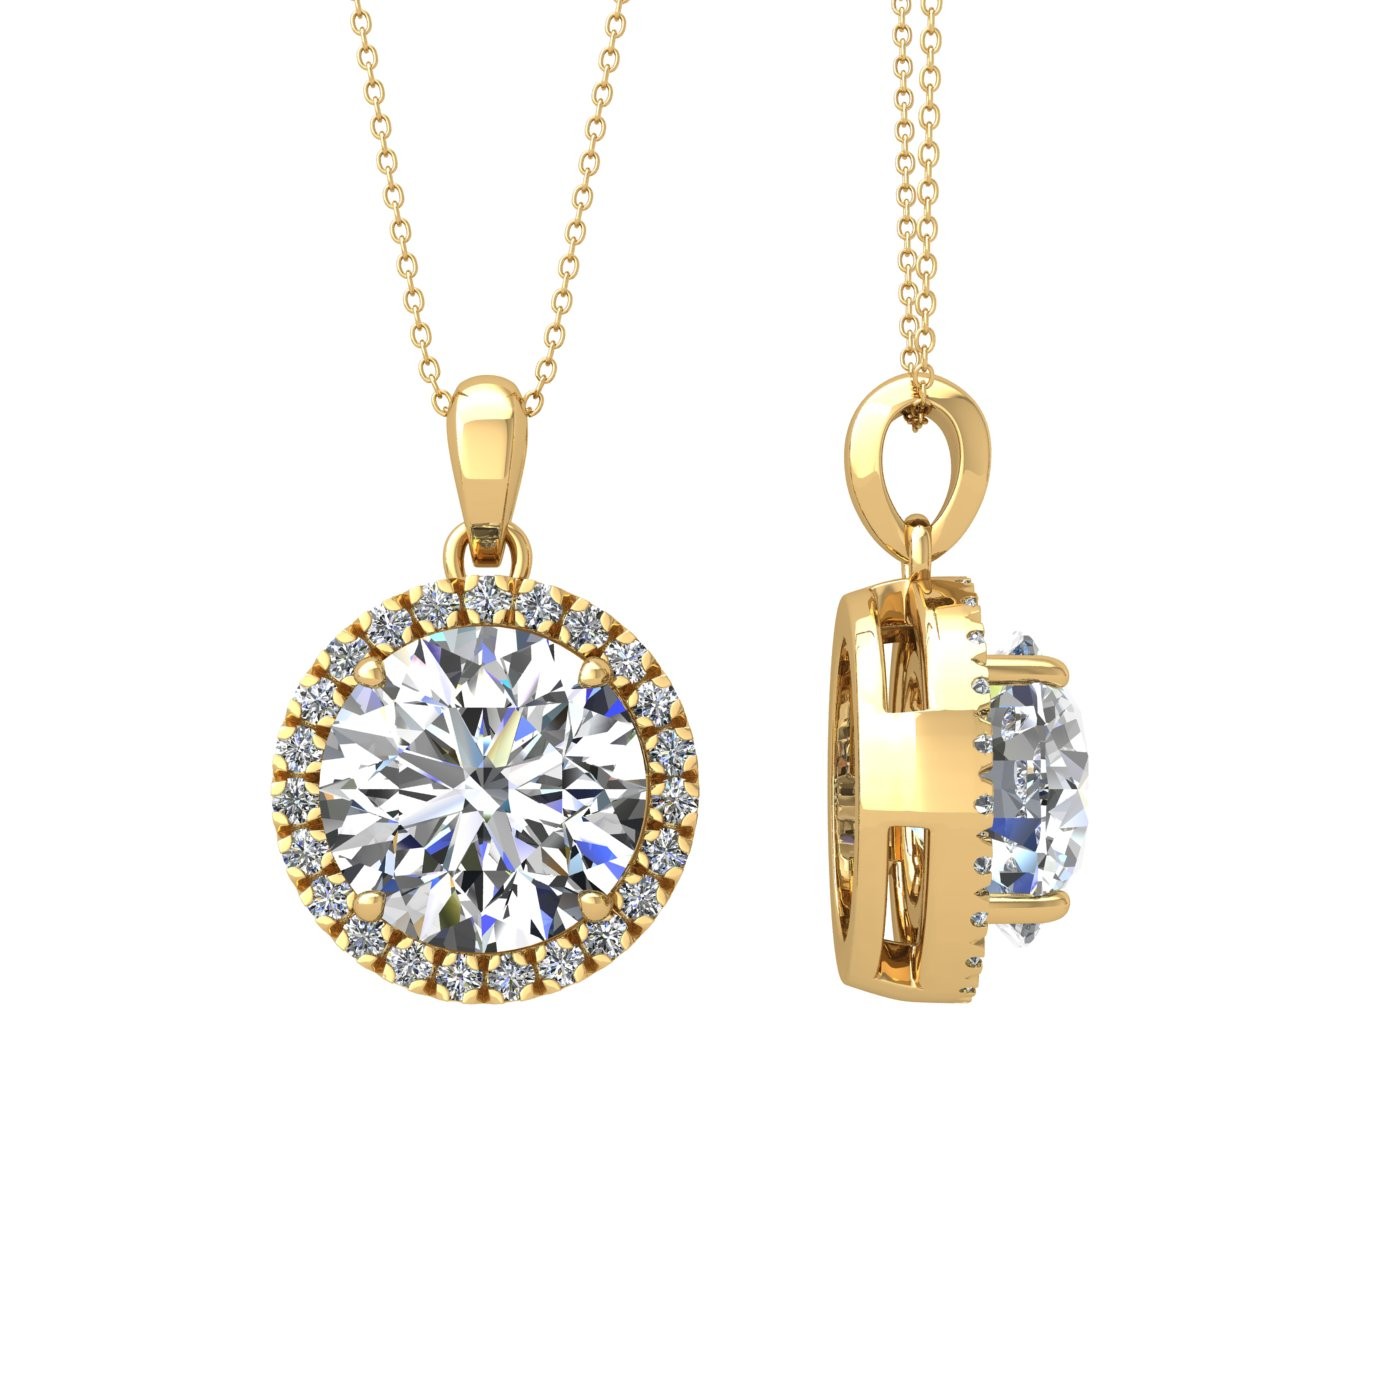 18k yellow gold  2,5 ct 4 prong round shape diamond pendant with diamond pavÉ set halo including chain seperate from the pendant Photos & images